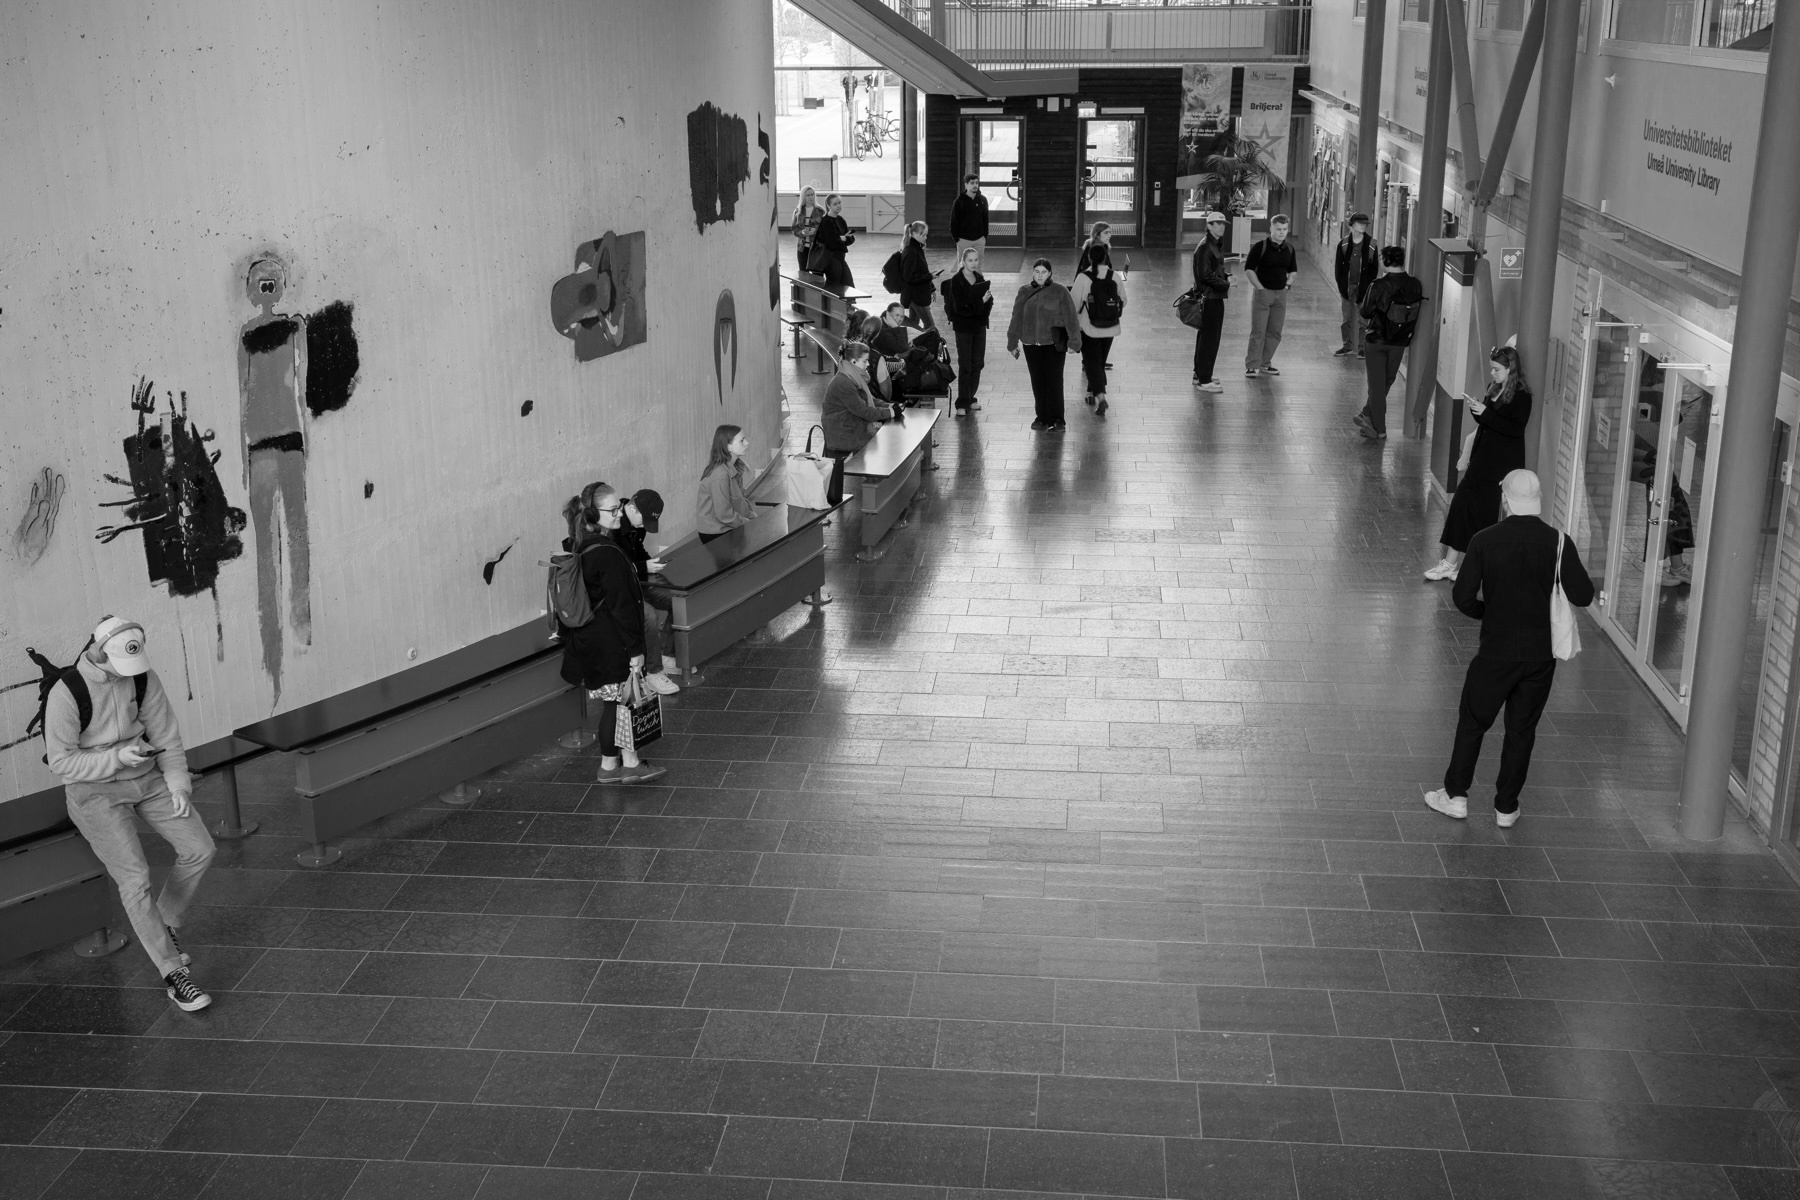 A black-and-white photo of an indoor public space with several people. Some are walking, while others are sitting on benches along the wall or standing. The wall features abstract and figure paintings. In the background, there is a staircase.